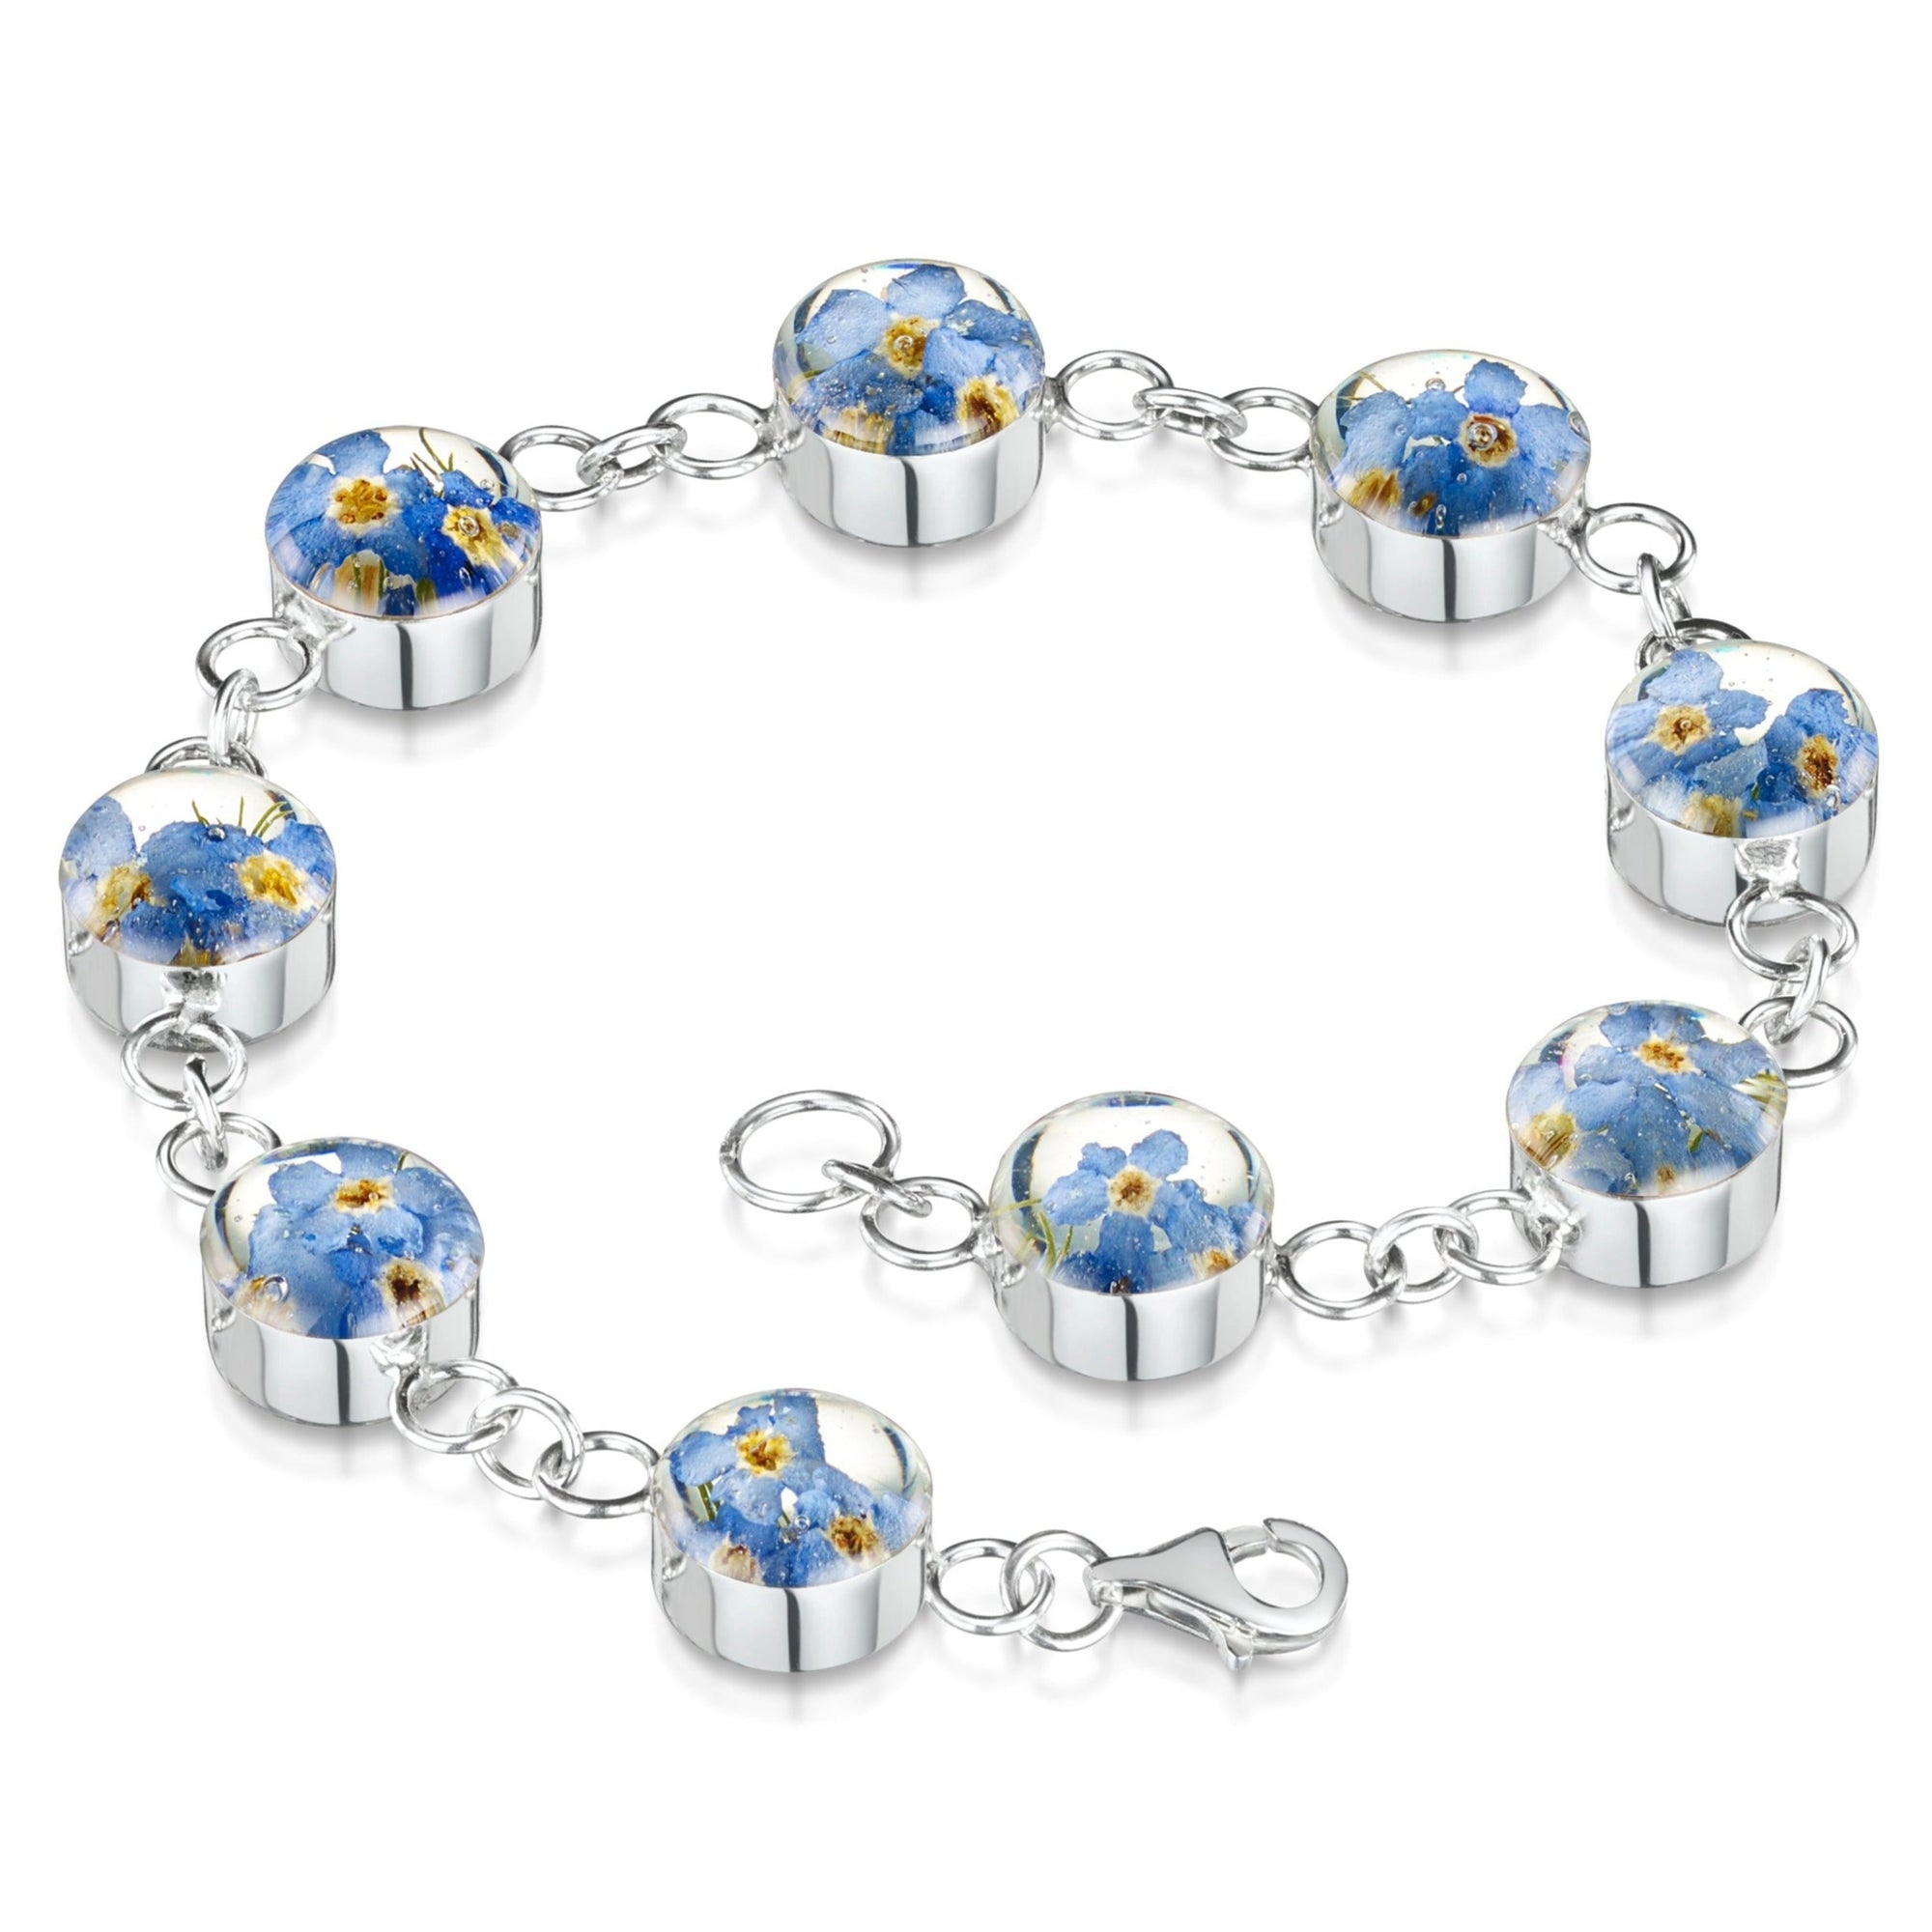 Sterling silver round bracelet with lobster clasp. Each of the nine round charms has real forget-me-not flowers set in resin.